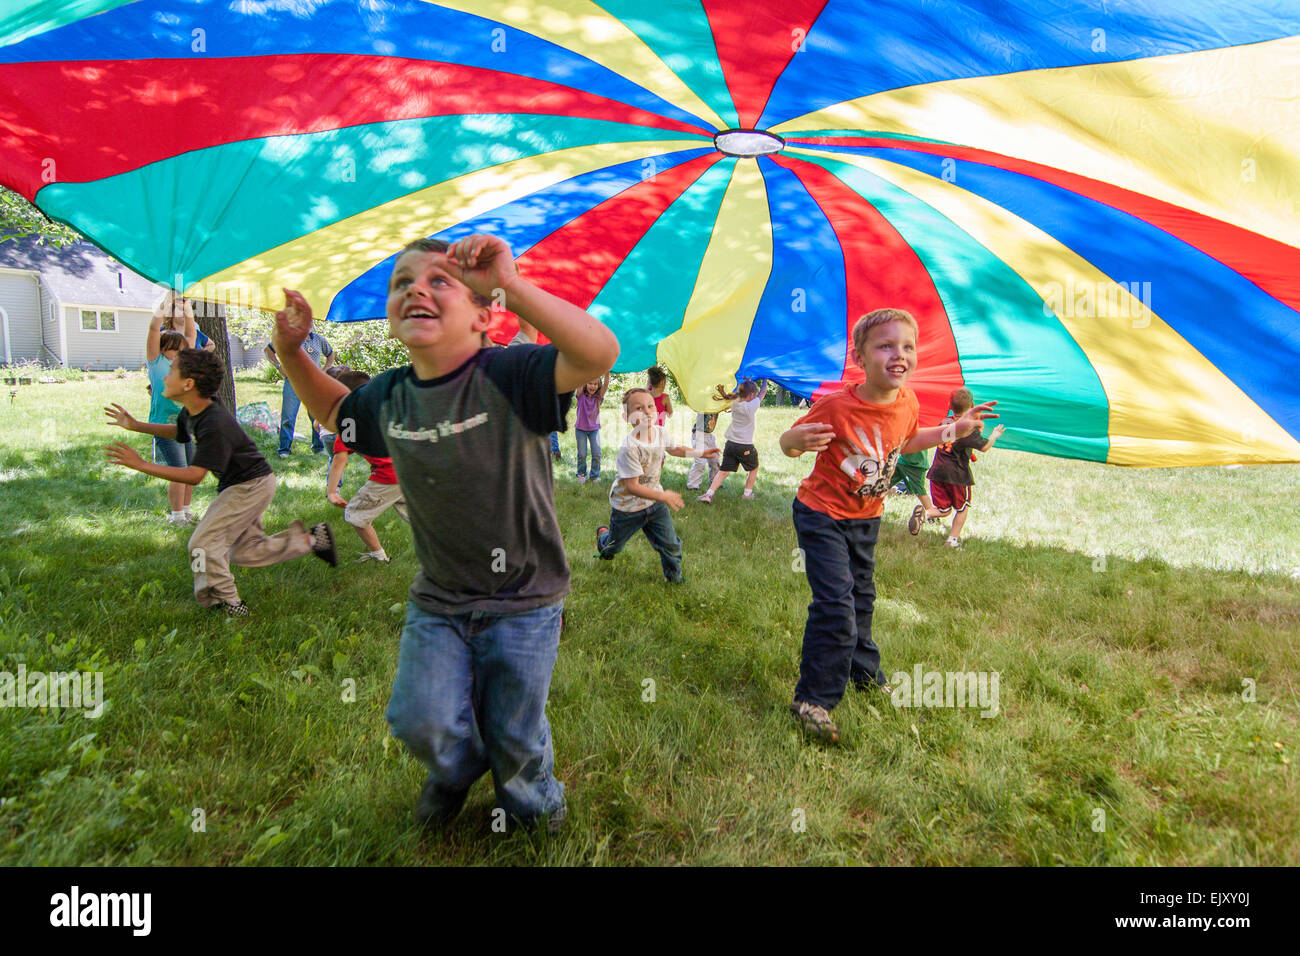 Boys and girls playing under a colorful parachute Stock Photo